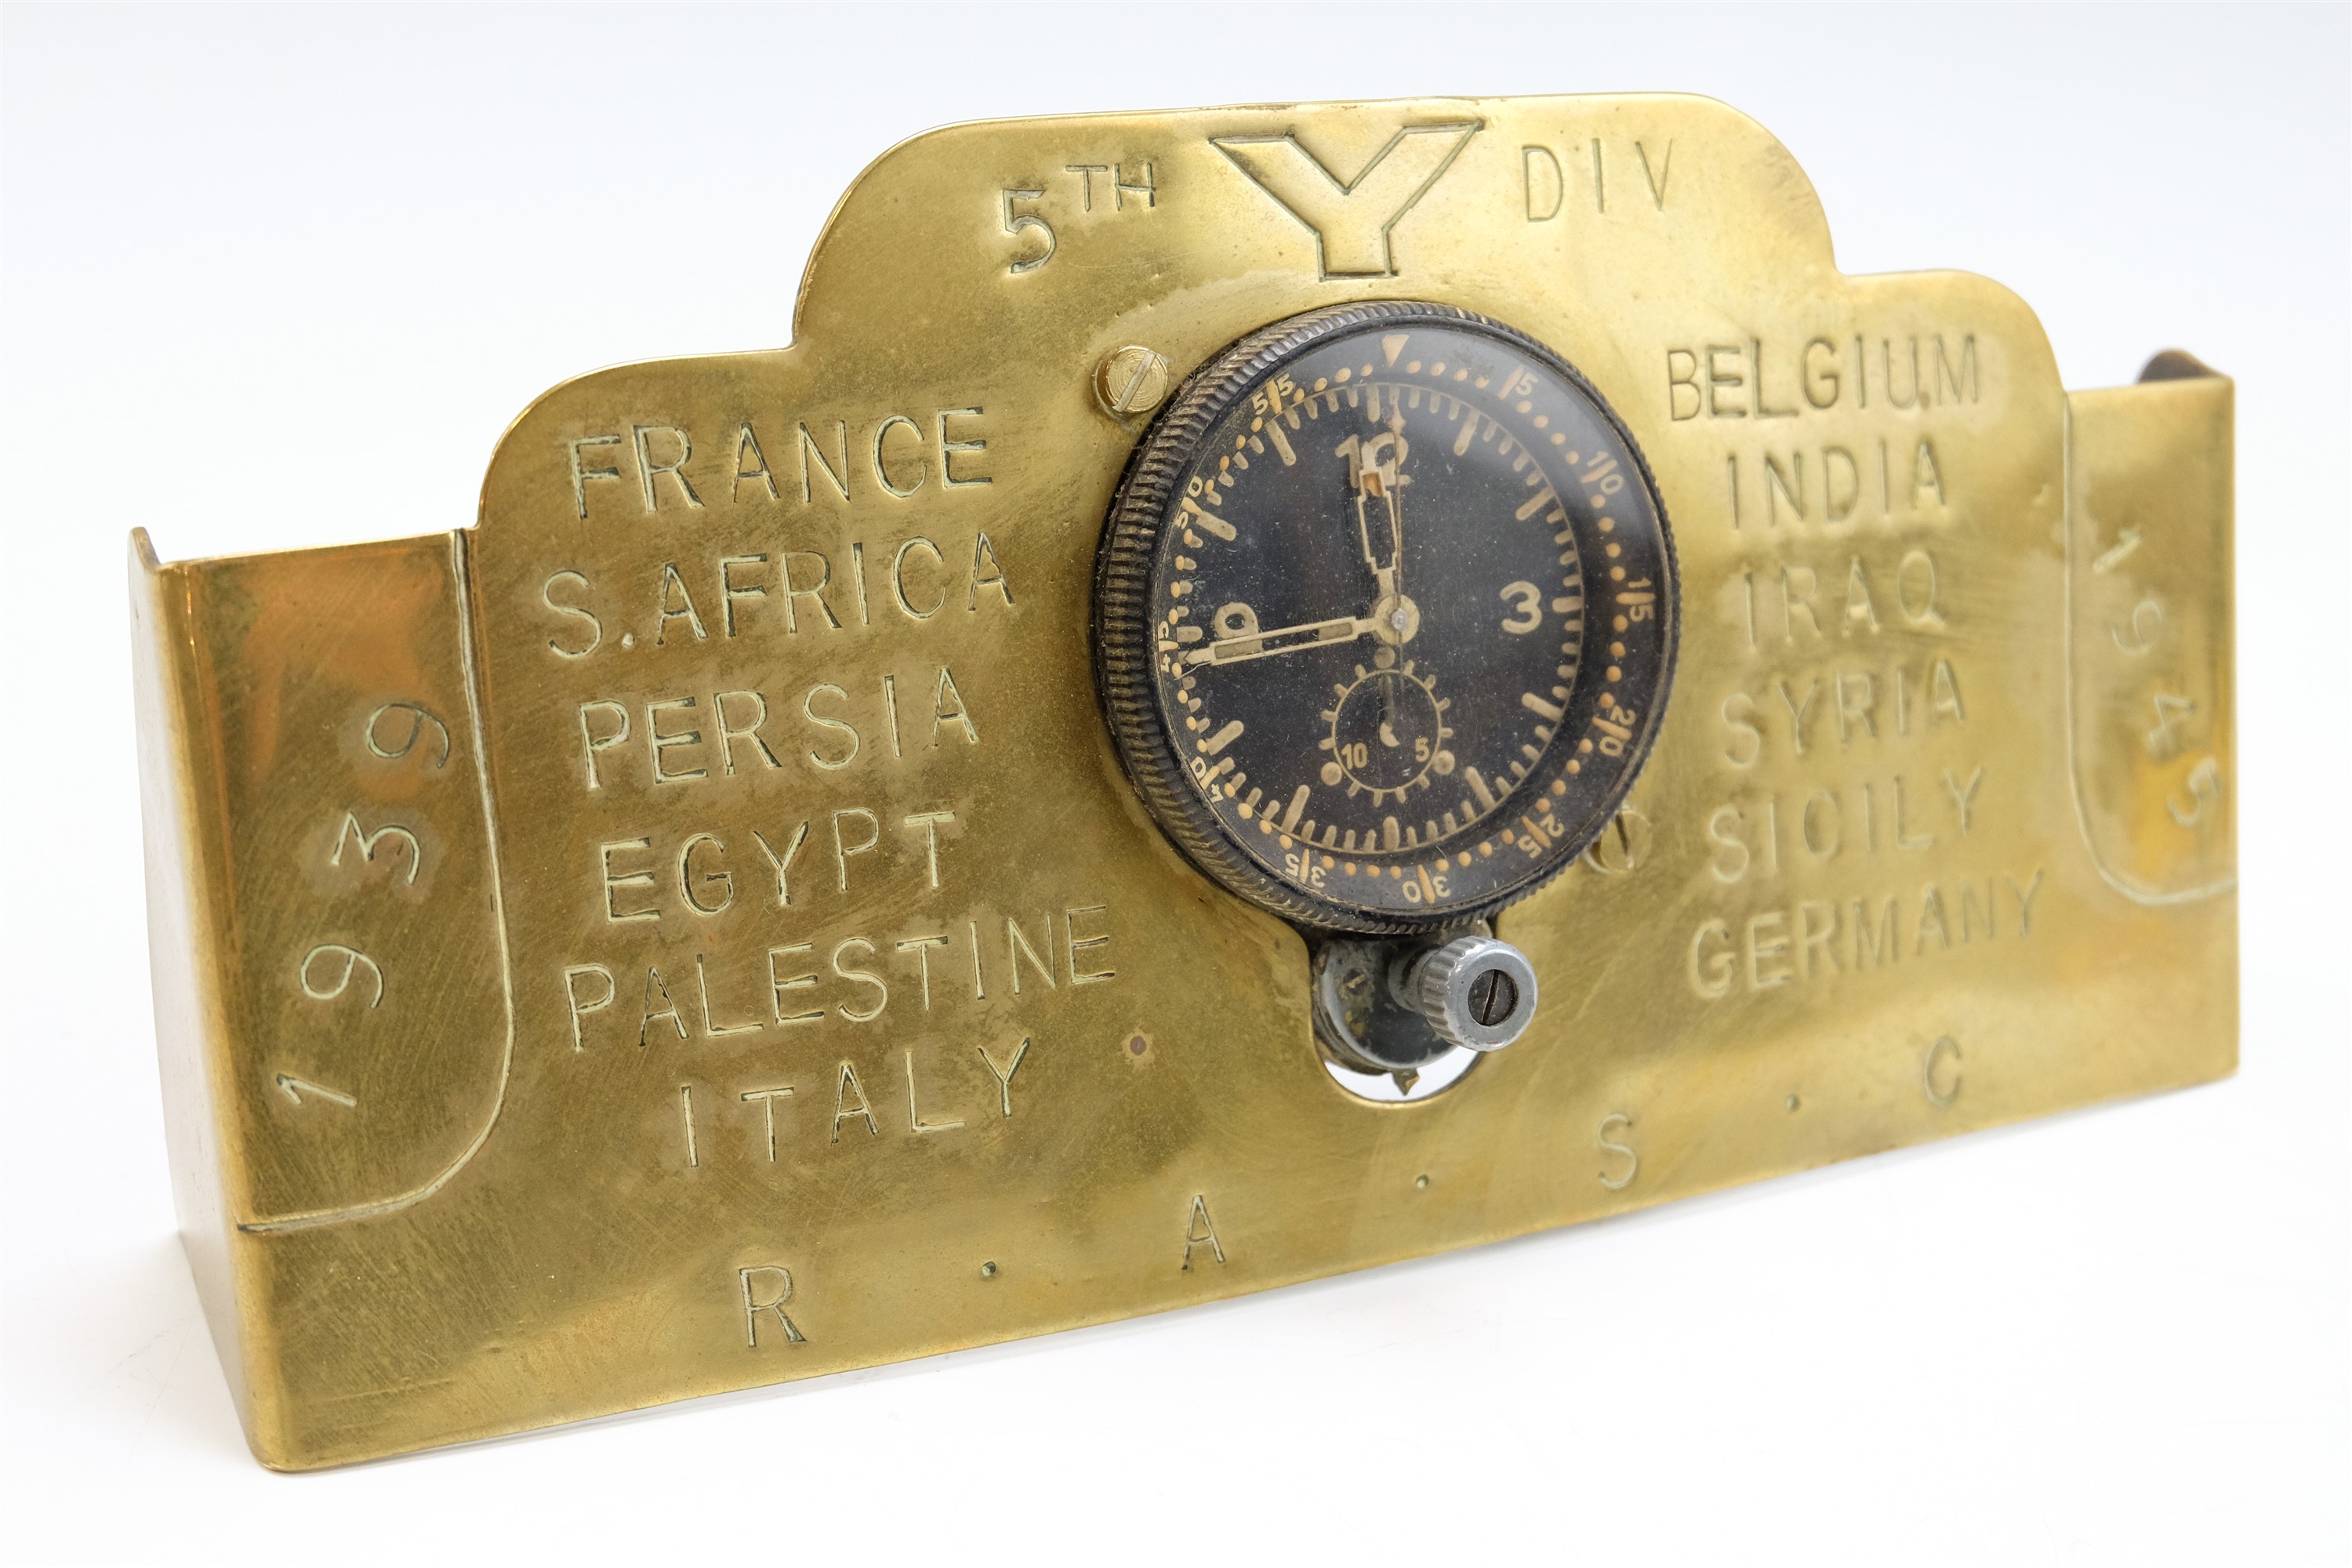 A German Third Reich Luftwaffe aircraft cockpit clock, mounted onto a brass stand by a Royal Army